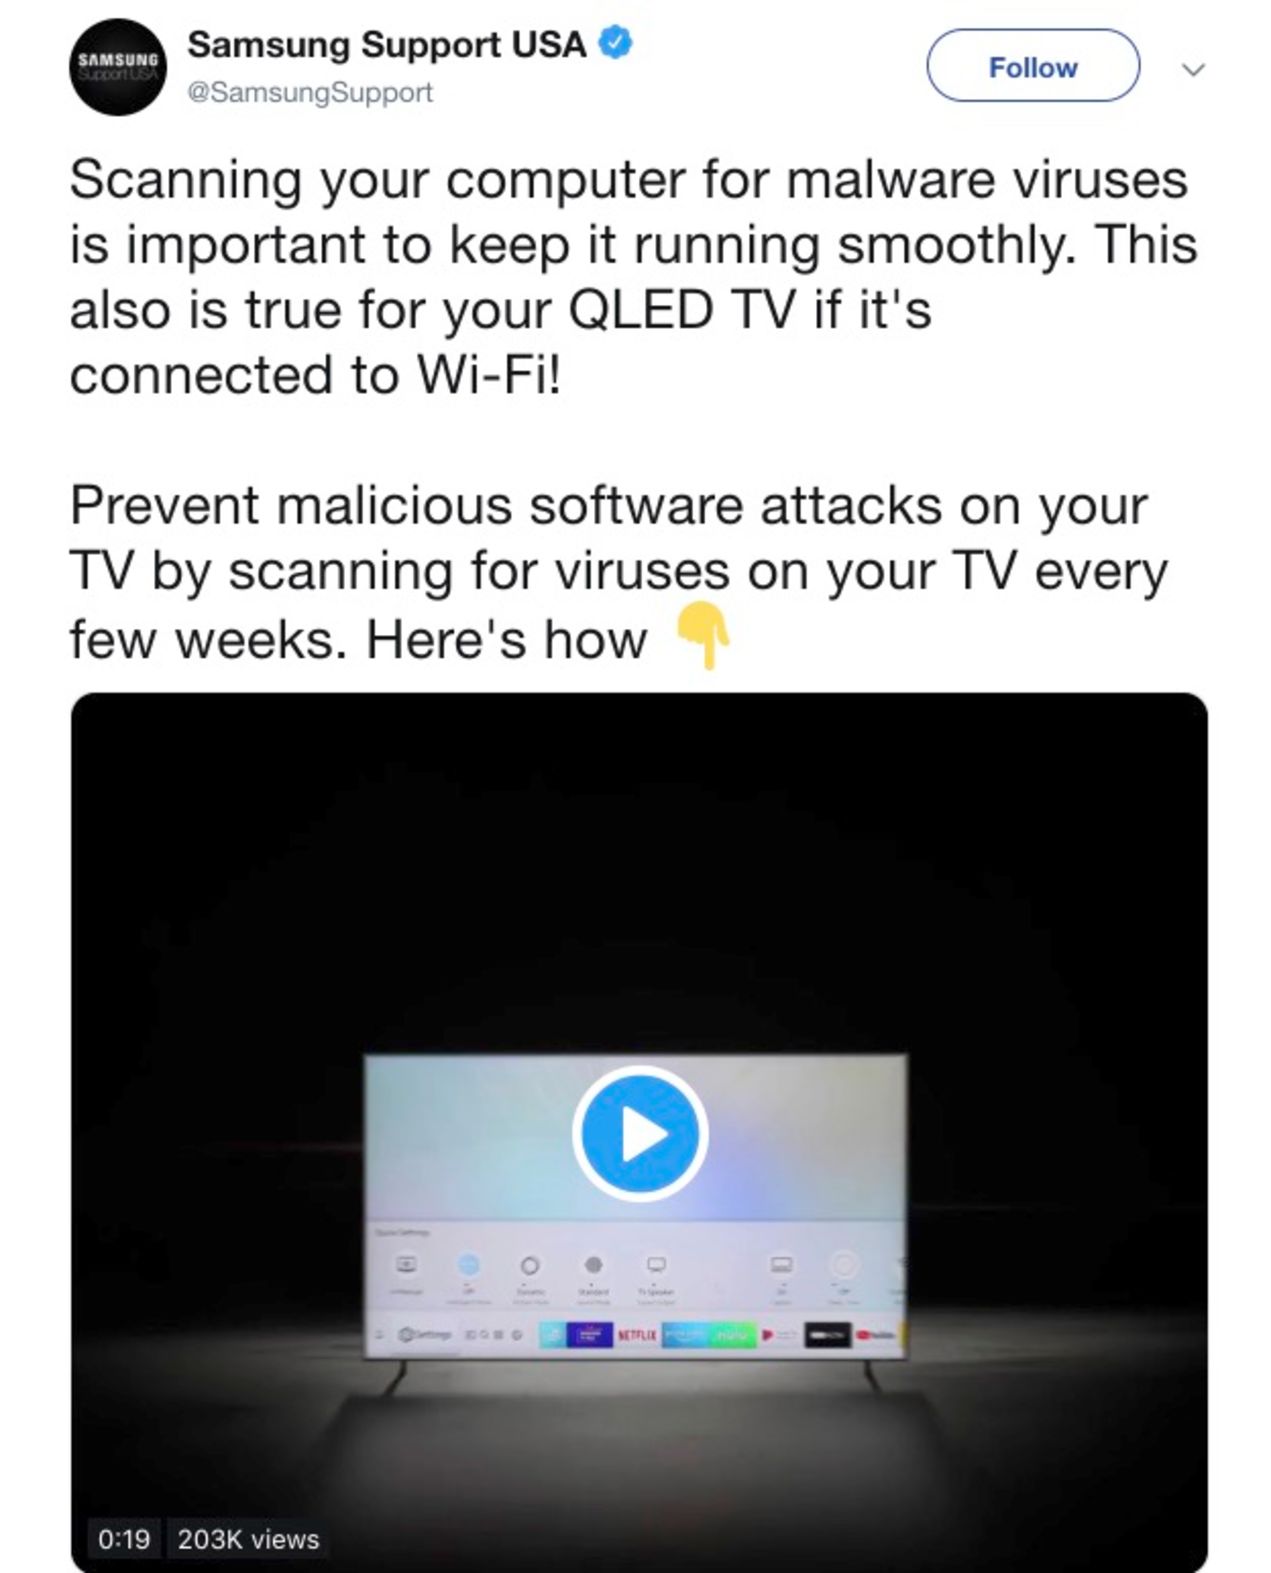 Samsung tweet suggests scanning your smart TV for malware every few weeks 1